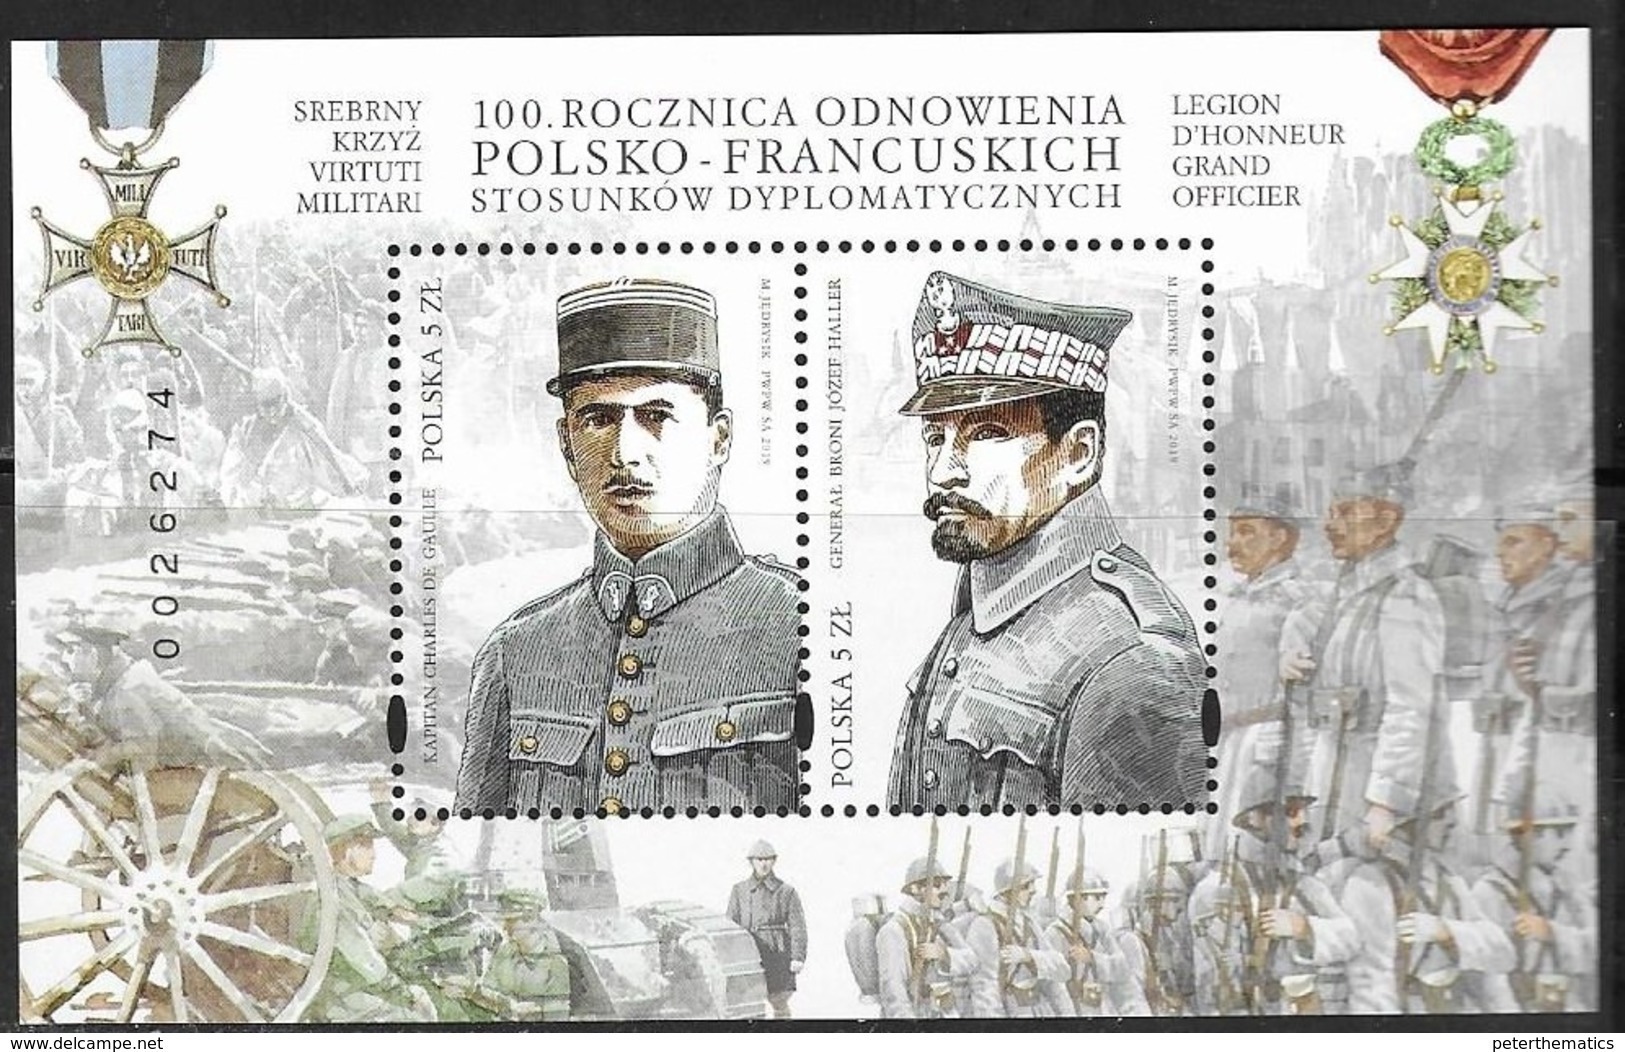 POLAND, 2019, MNH, JOINT ISSUE WITH FRANCE, DIPLOMATIC RELATIONS, WWII, DE GAULLE,  JOZEF HALLER, MILITARY, SHEETLET. - Joint Issues